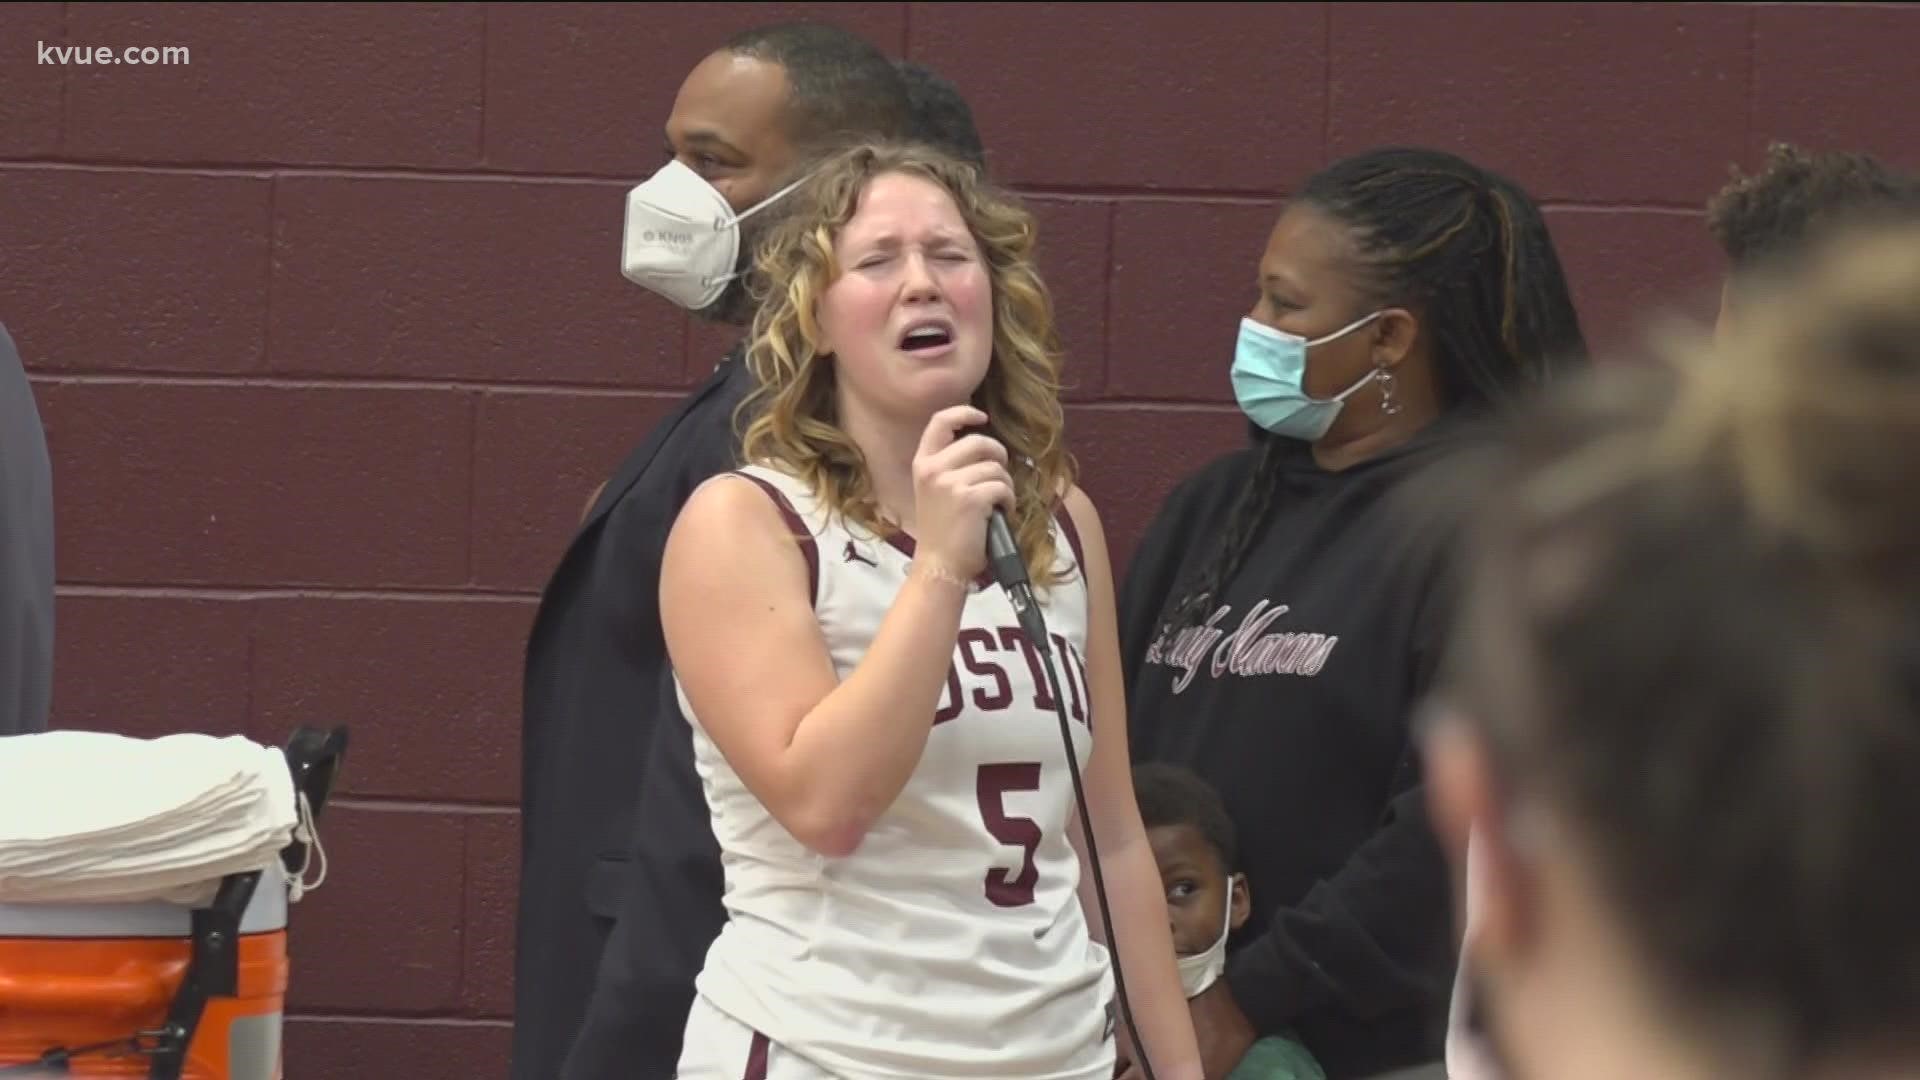 Eleanor Bangle, a senior shooting guard for Austin High, stepped up to the mic and belted out a phenomenal national anthem before the team's 53-37 win.